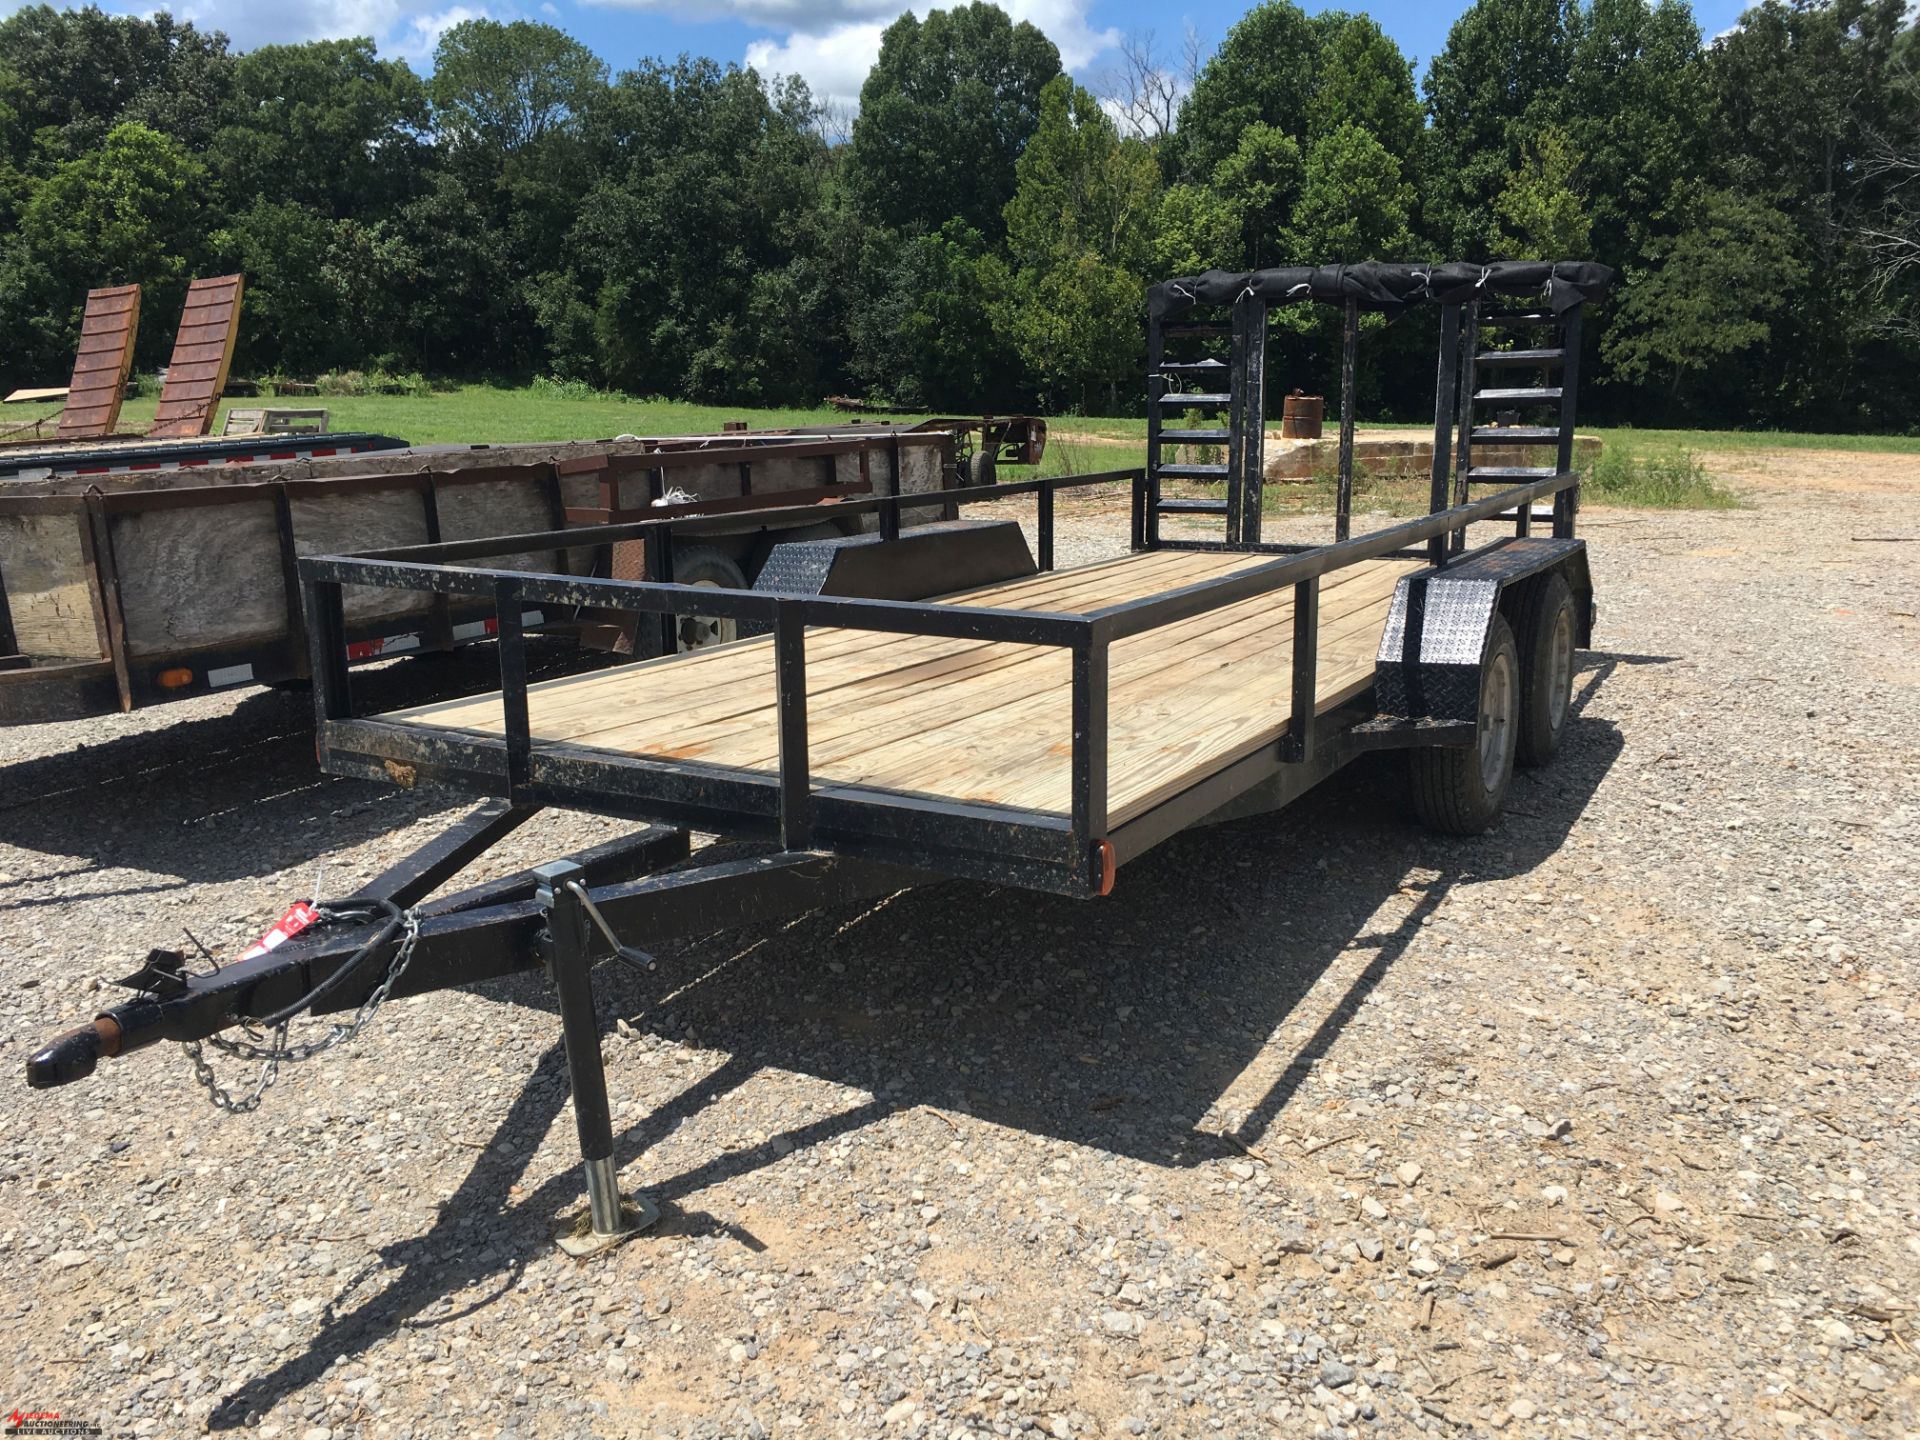 16' TRAILER, WITH WOOD DECK, FOLD DOWN RAMPS, CUSTOM BUILT BY FARM, DOES NOT SELL WITH - Image 2 of 7